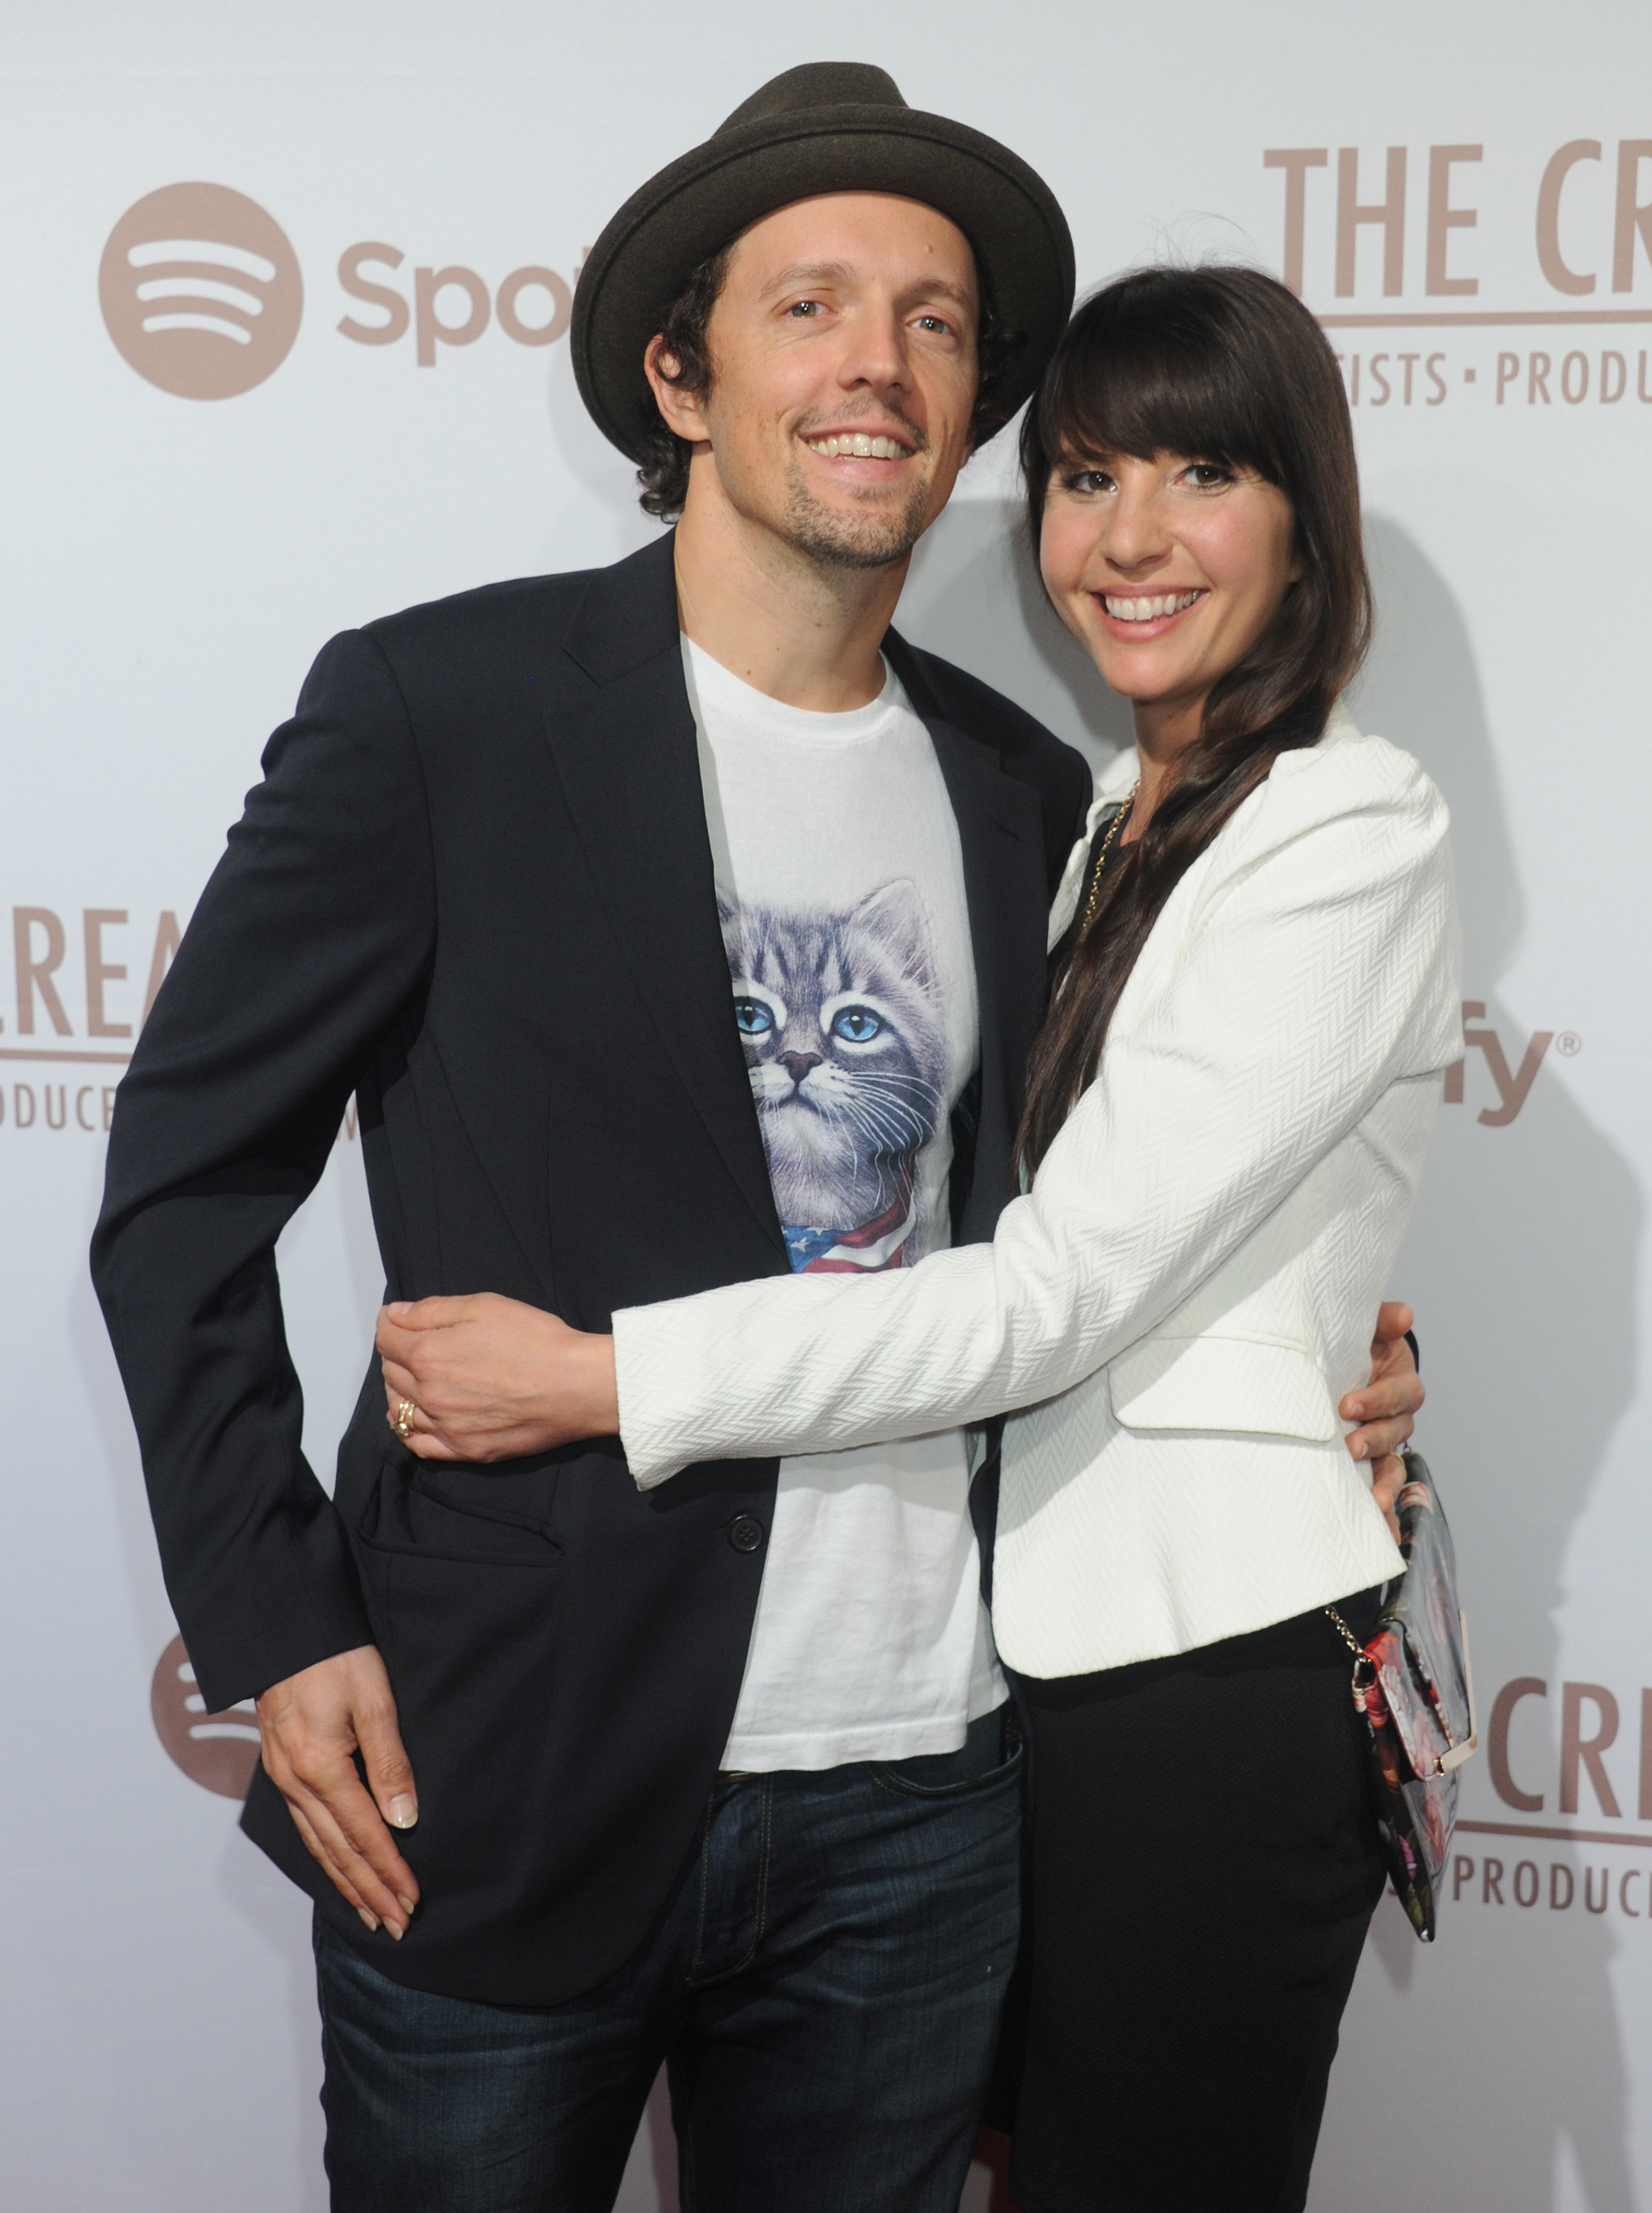 Jason Mraz and Christina Carano arrive at The Creators Party Presented by Spotify, Cicada, Los Angeles at Cicada on February 13, 2016, in Los Angeles, California. | Source: Getty Images